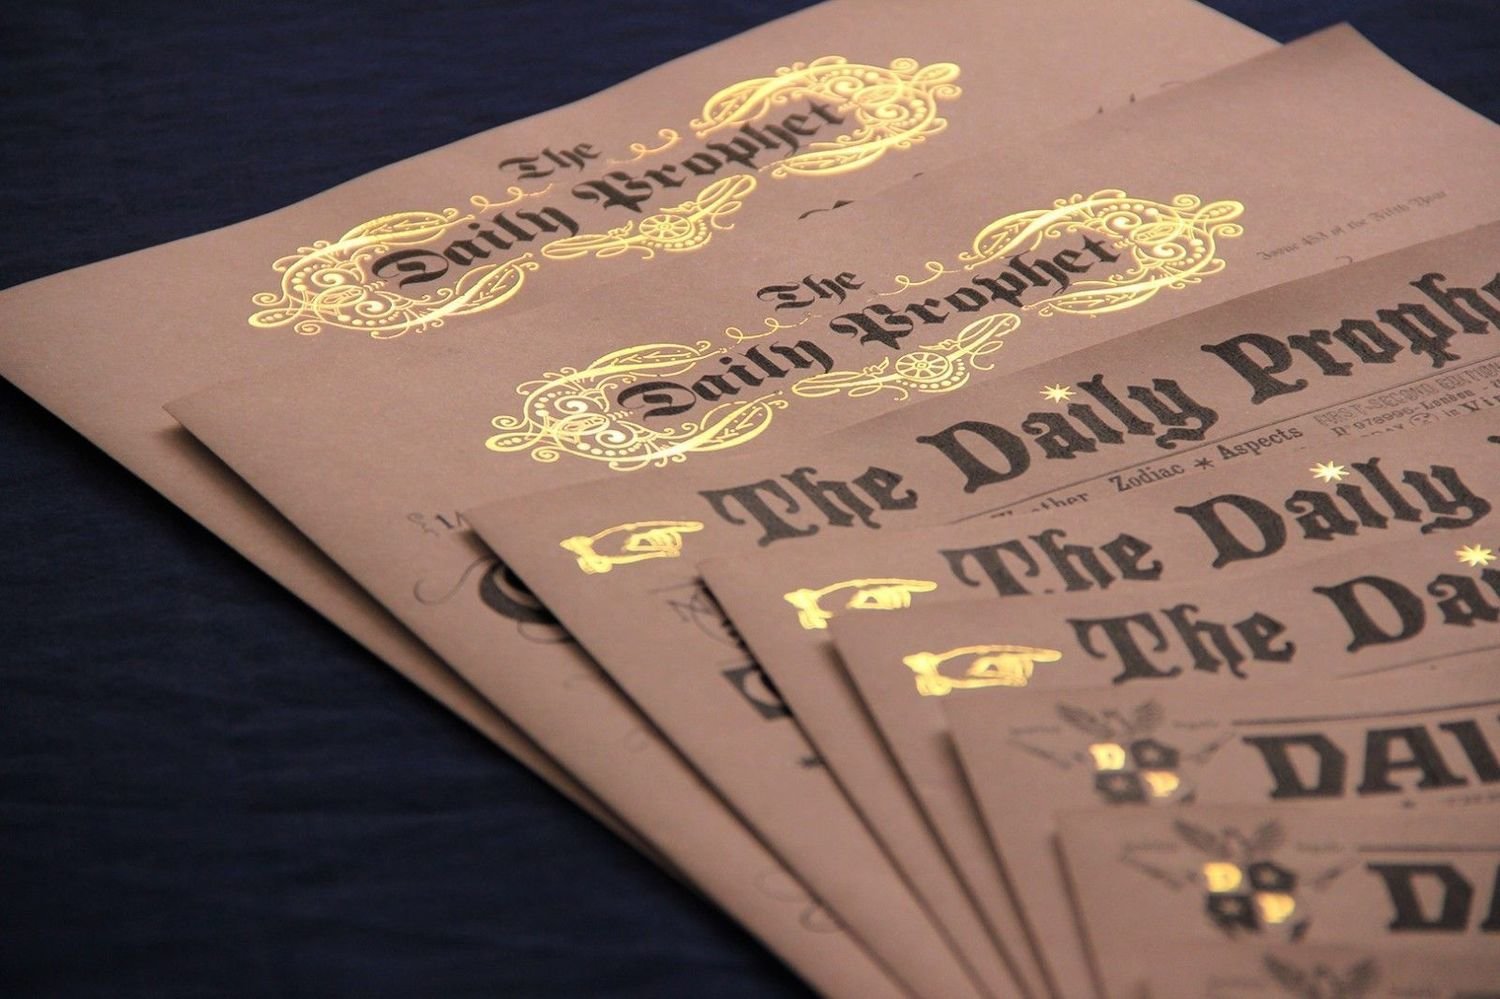 Wizarding Daily Newspapers